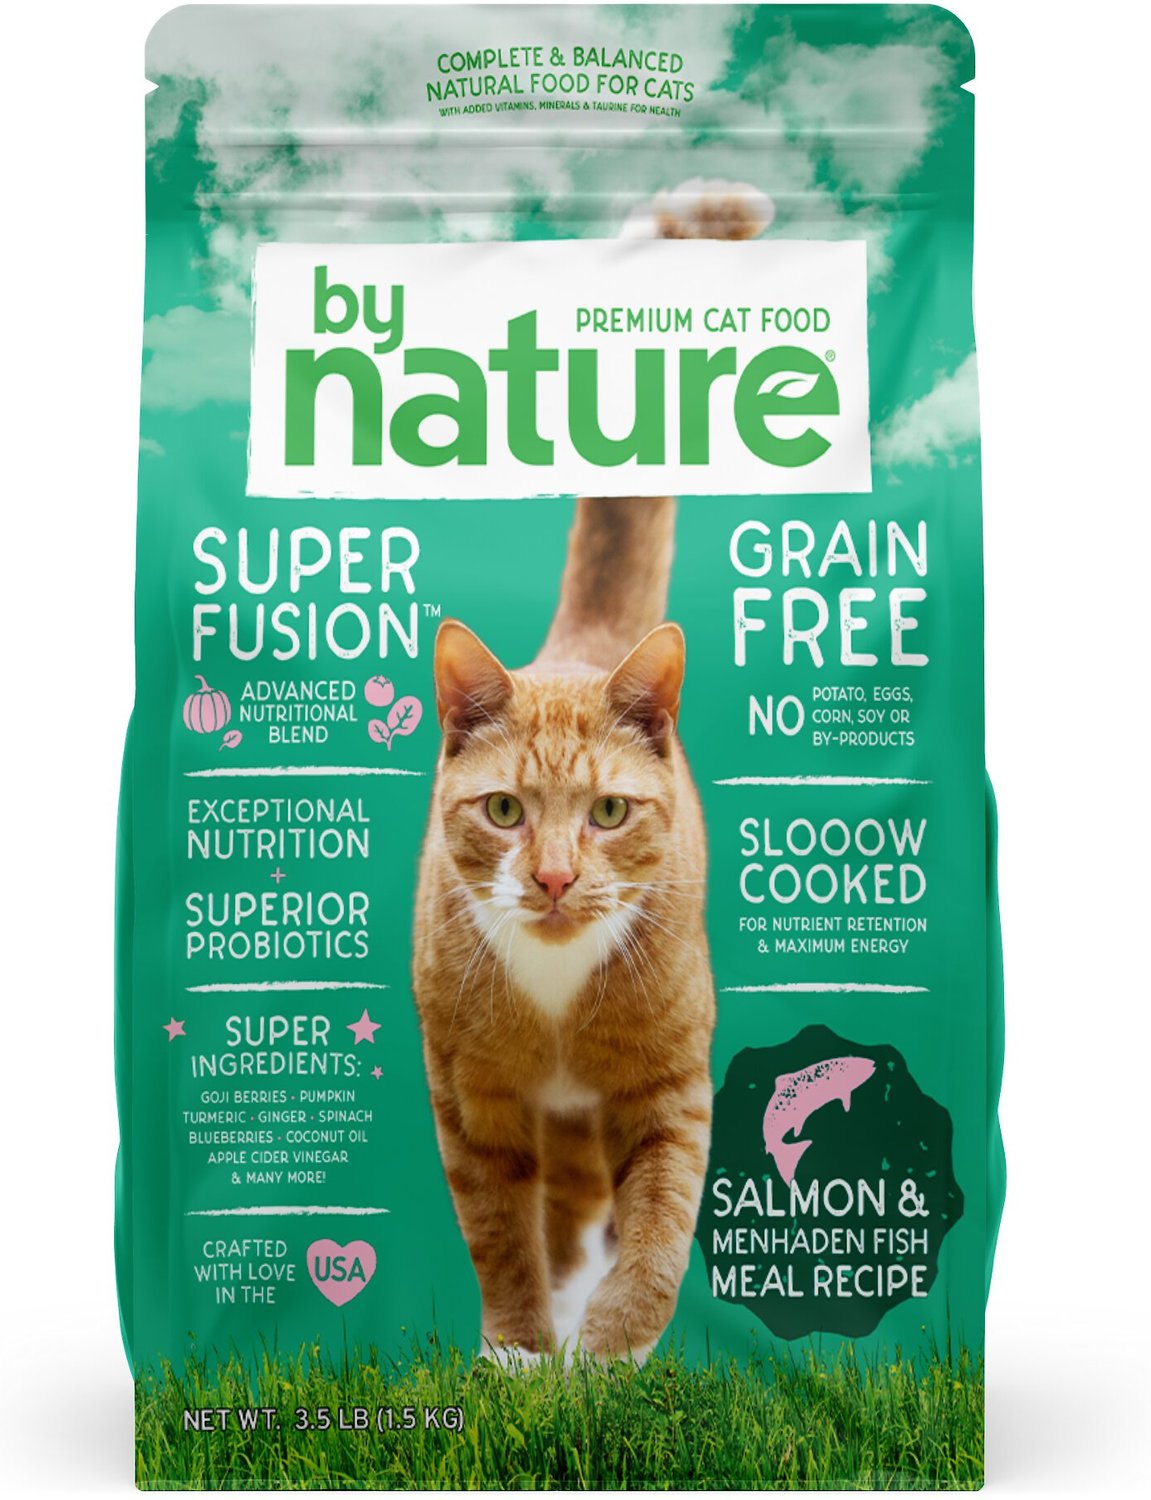 BY NATURE PET FOODS Salmon & Menhaden Fish Meal Recipe